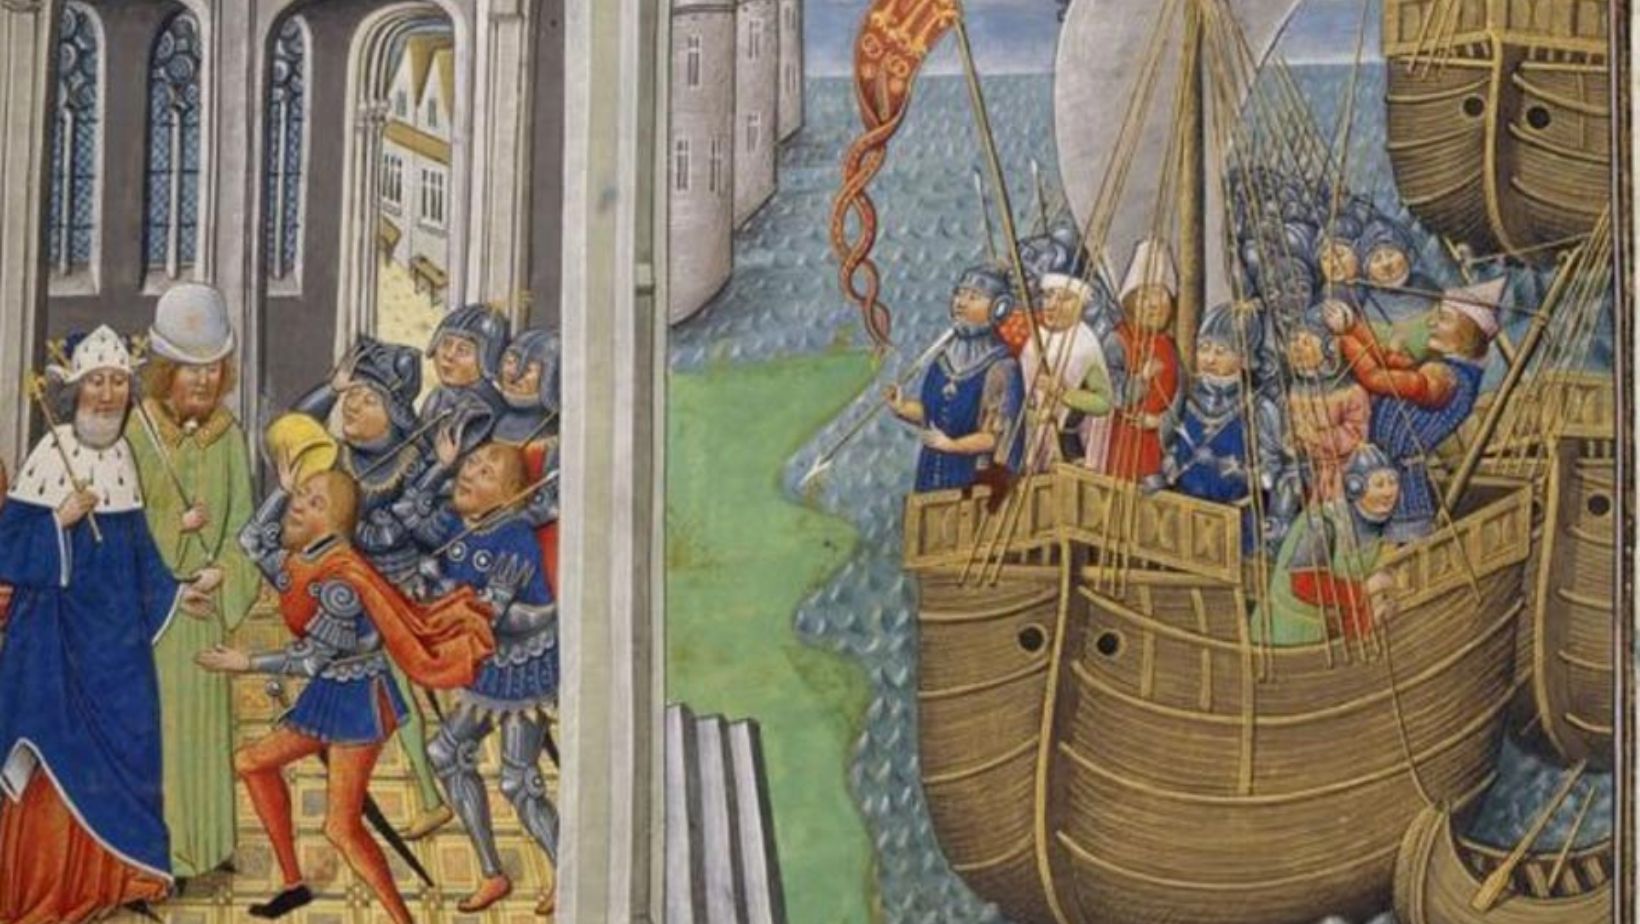 600-Year-Old Royal Ship Of Henry V Found Buried In Hampshire River